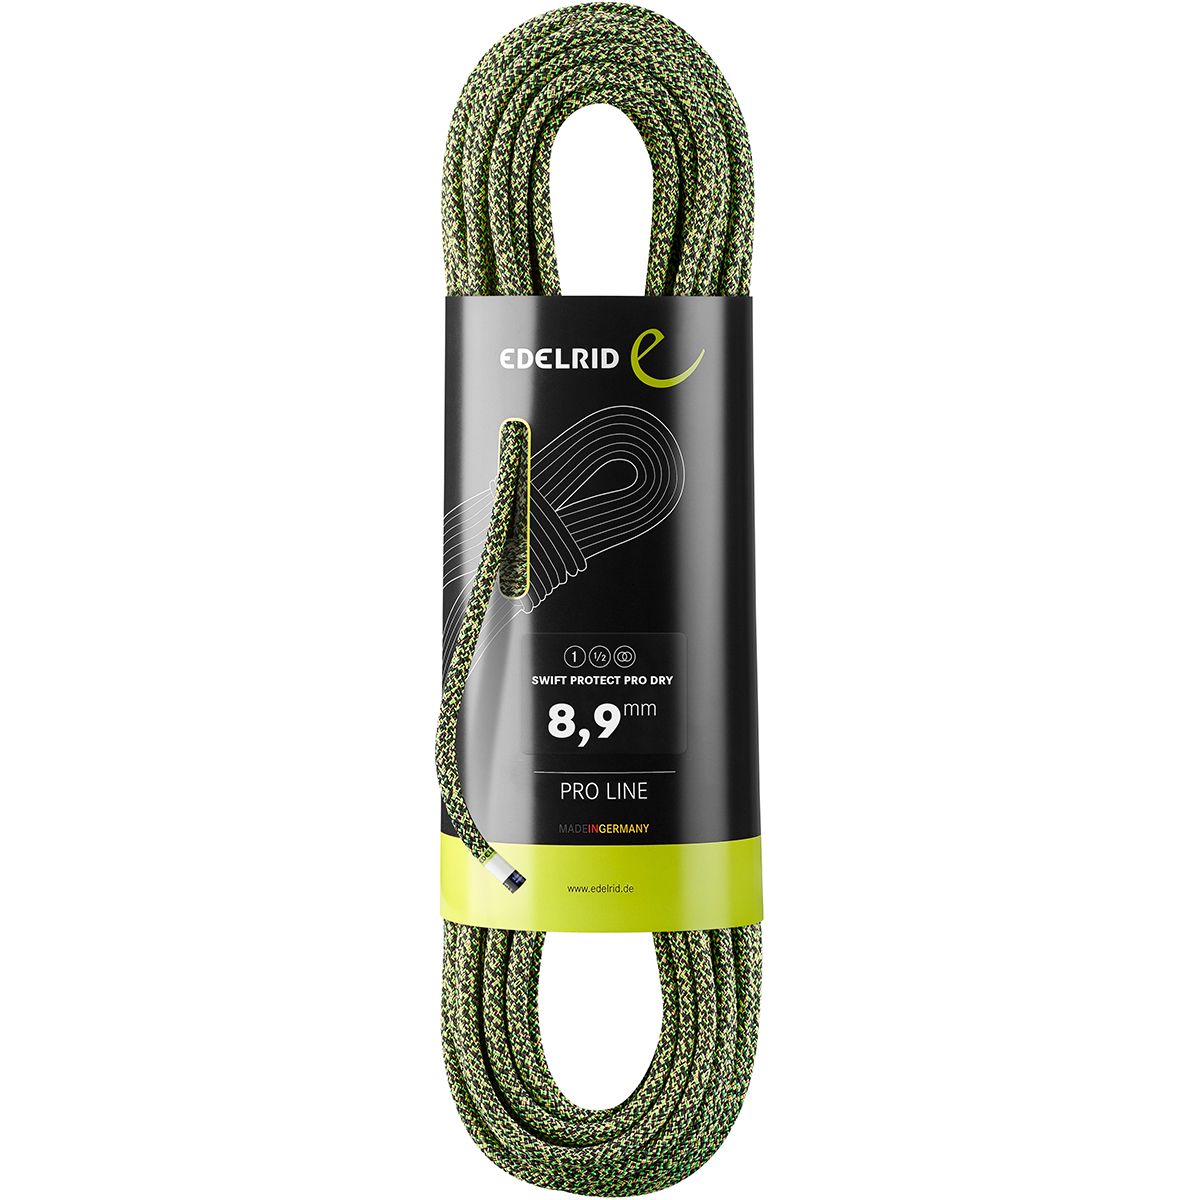 Edelrid Swift Protect Pro Dry 8.9mm x 70m